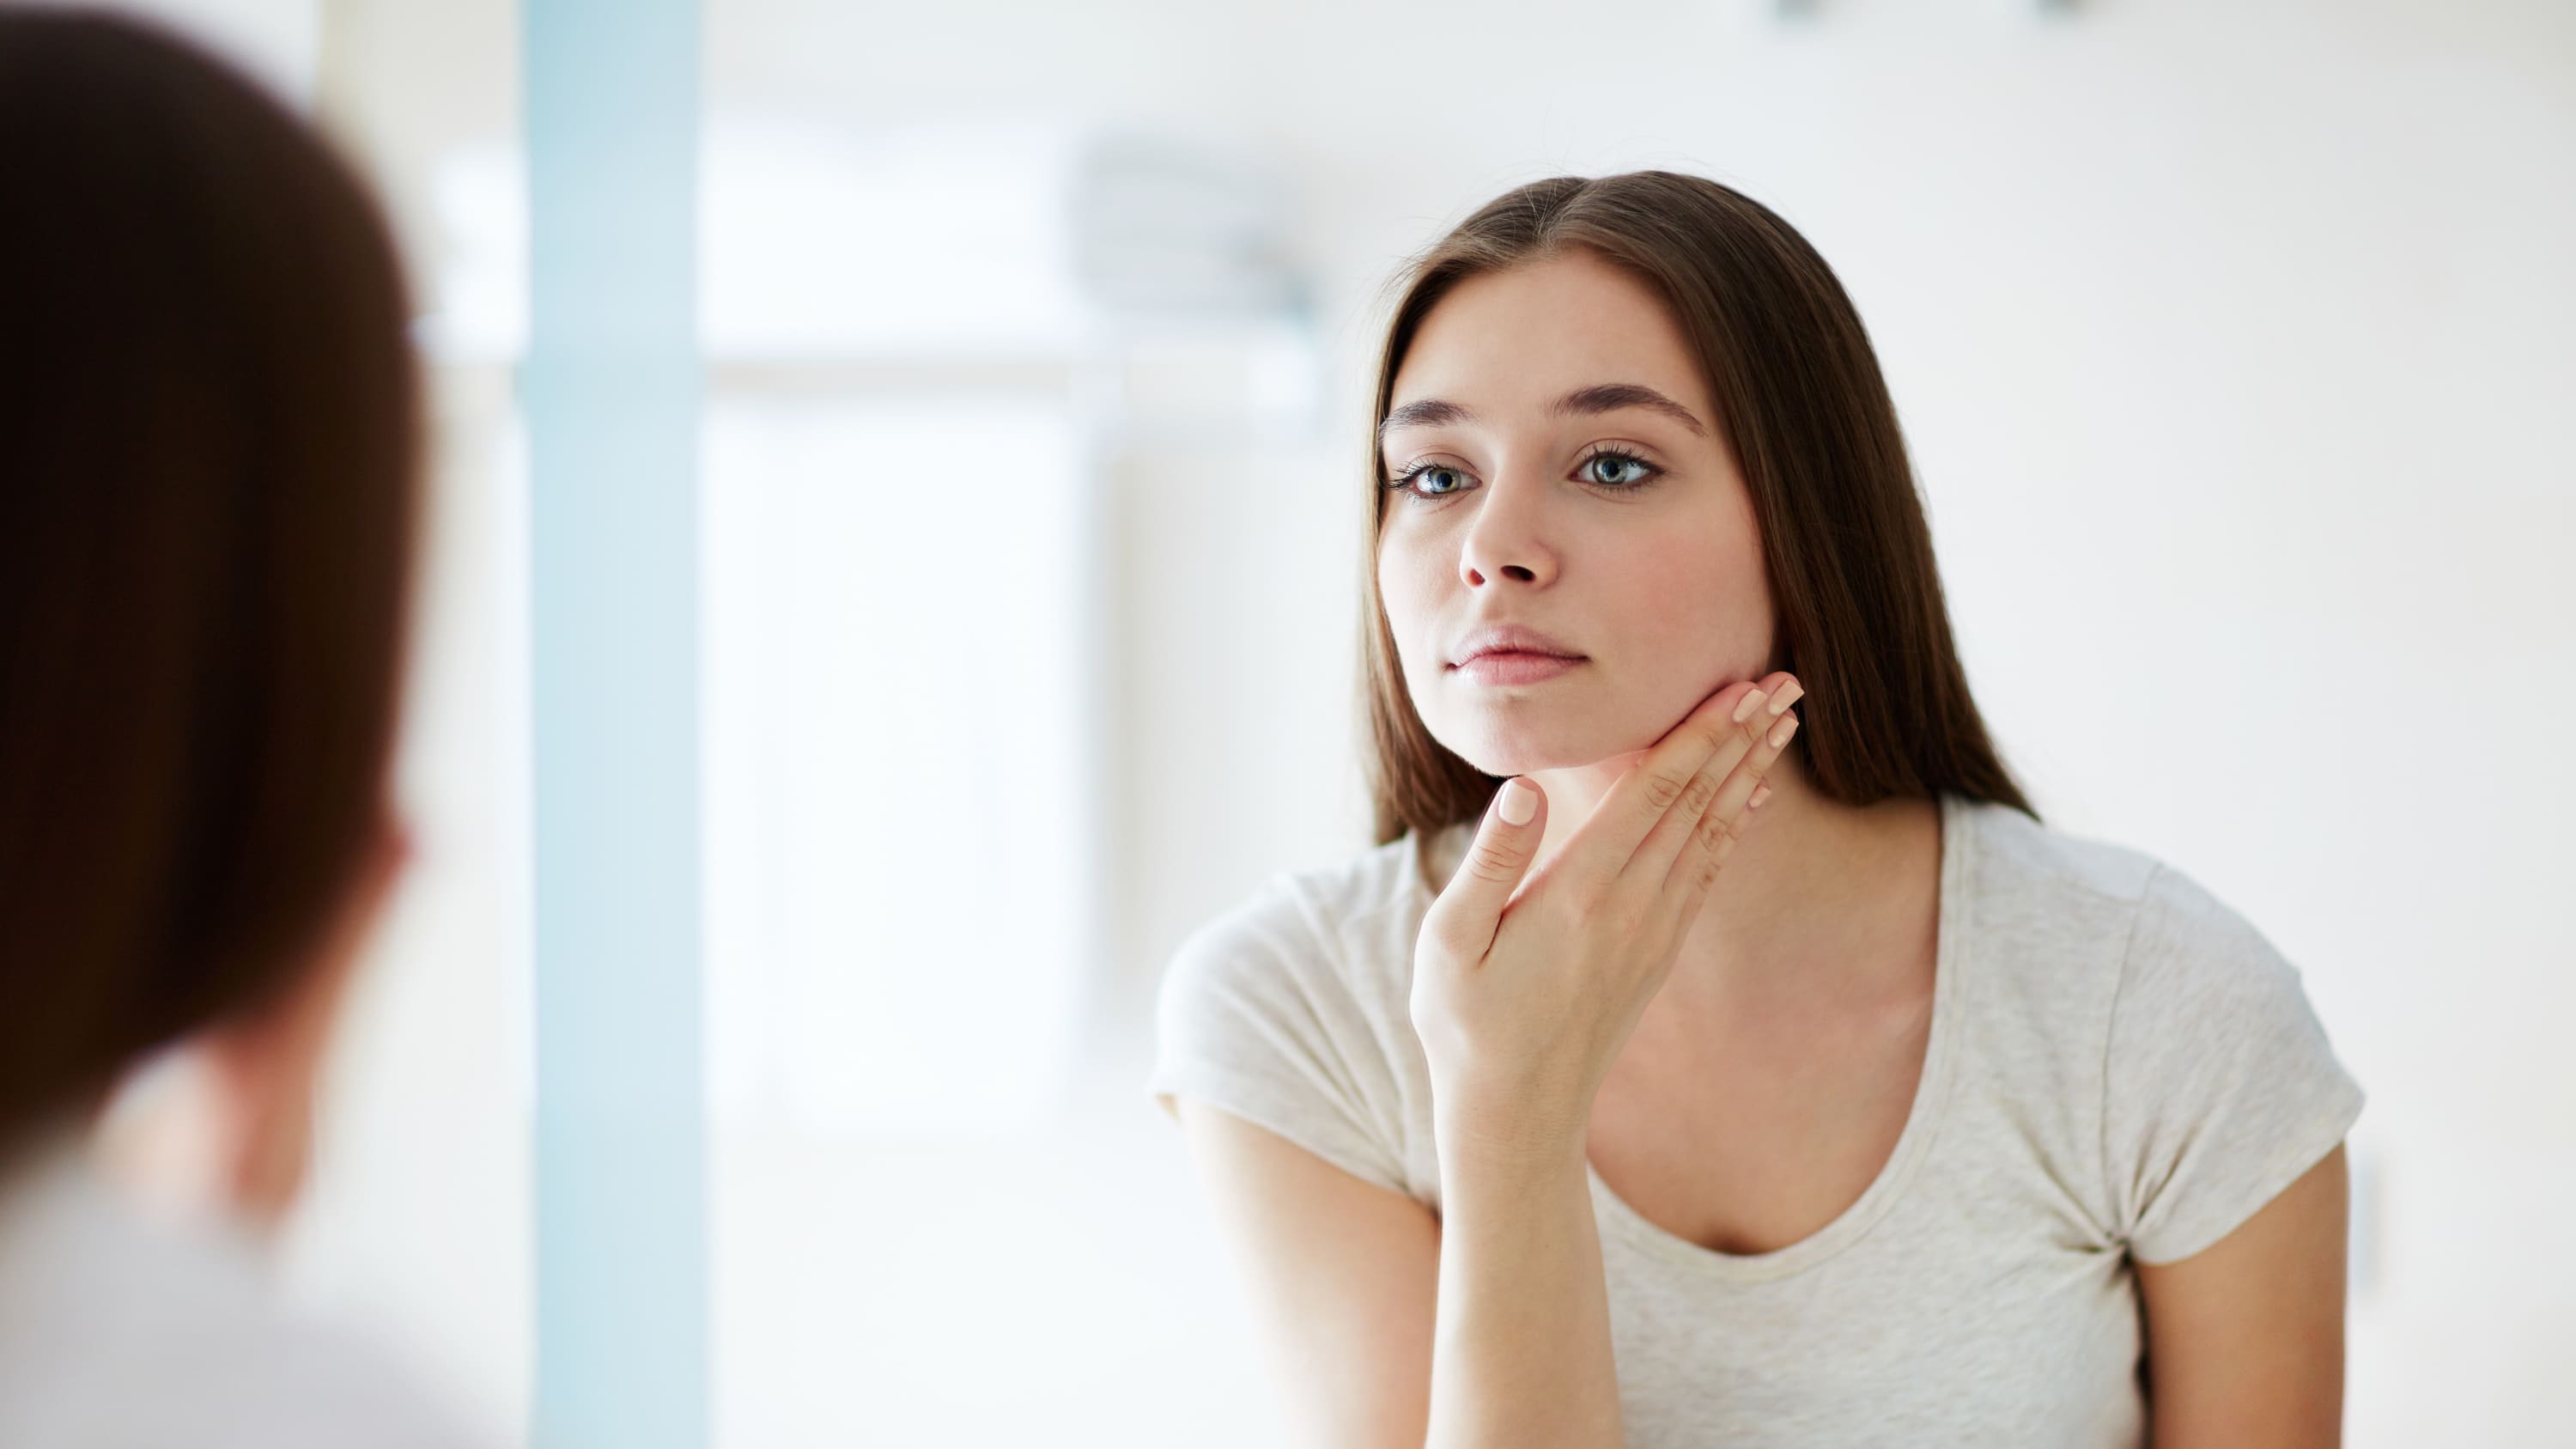 woman looking into a mirror, possibly considering at-home beauty products